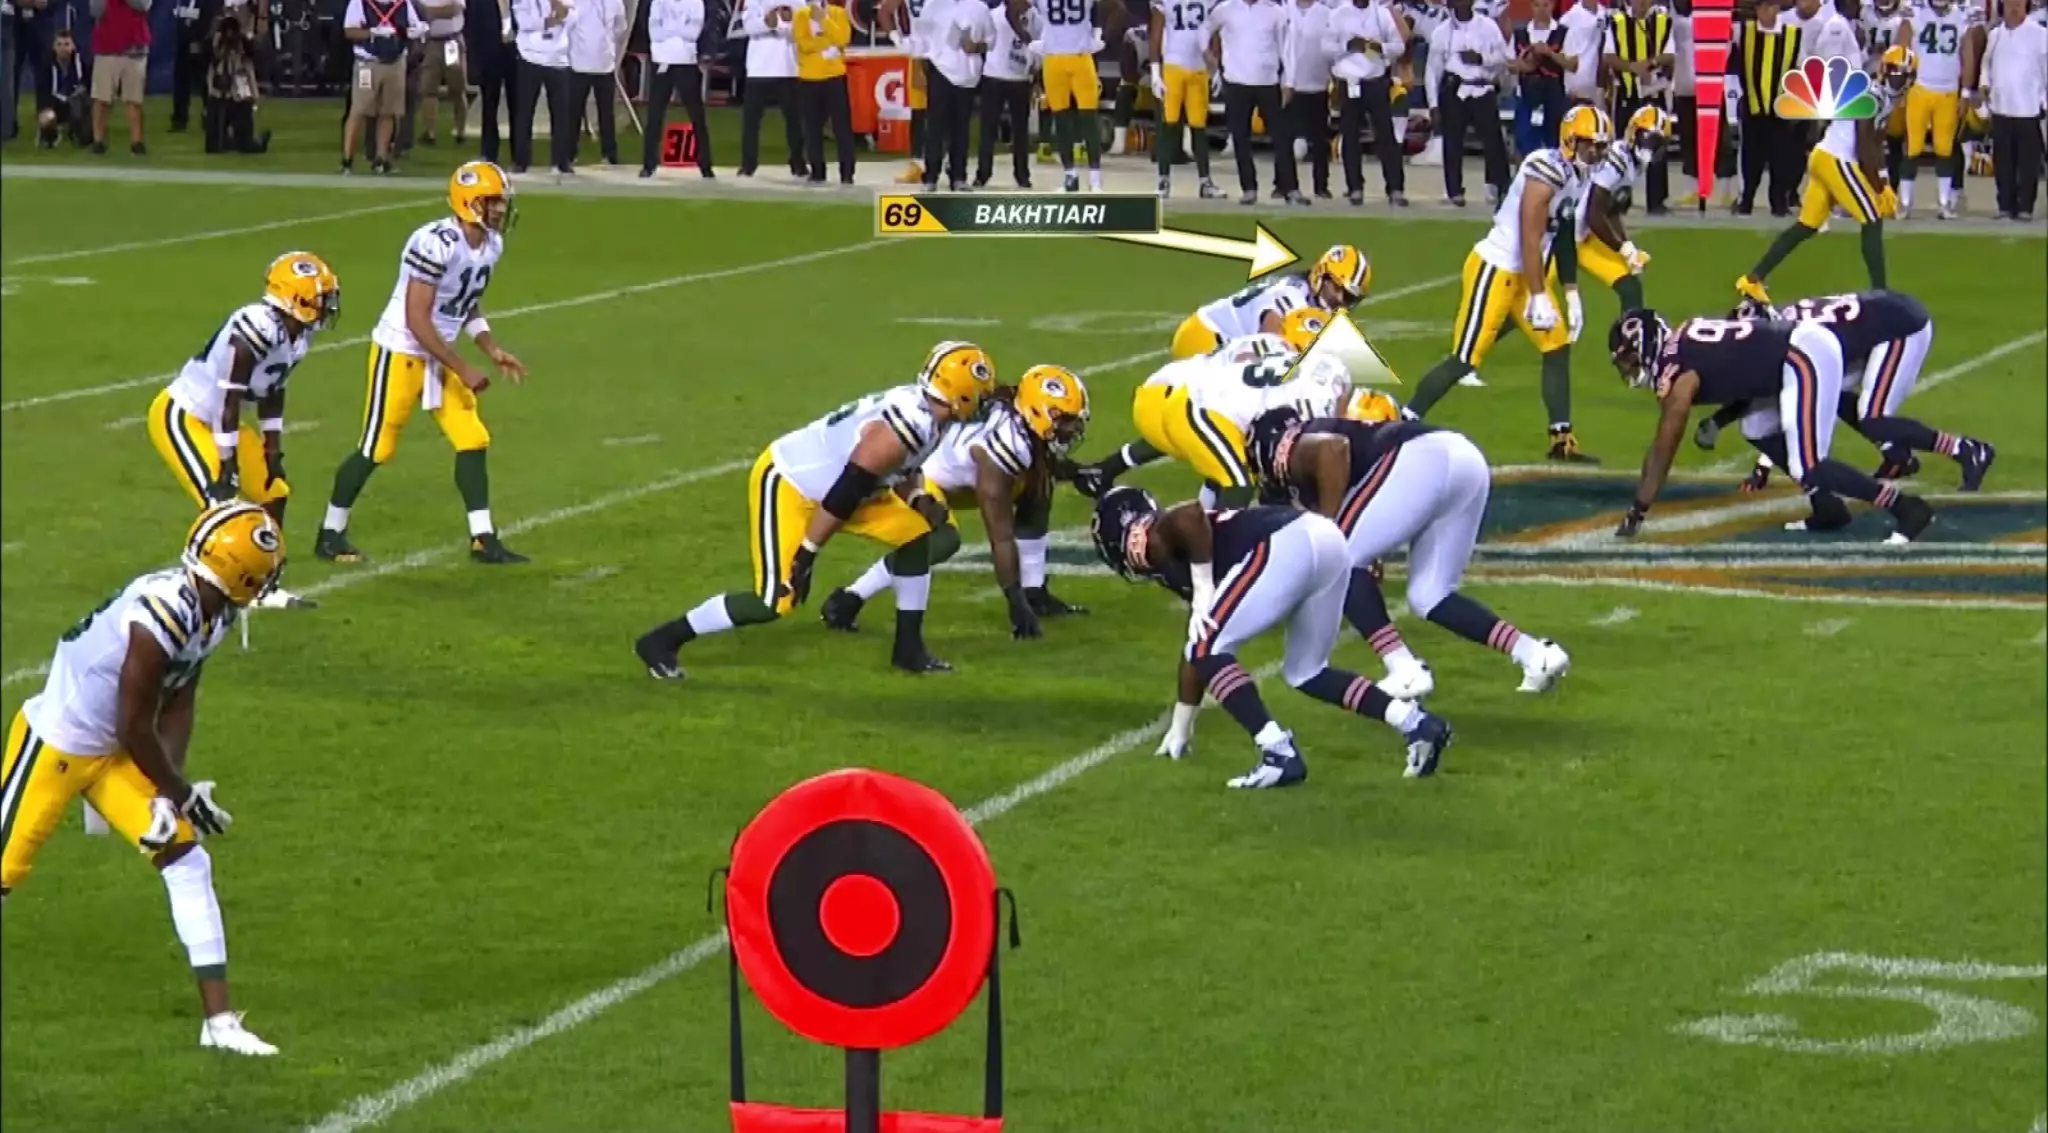 David Bakhtiari's secret is to look at Aaron Rodgers before the snap and not the man he's blocking.